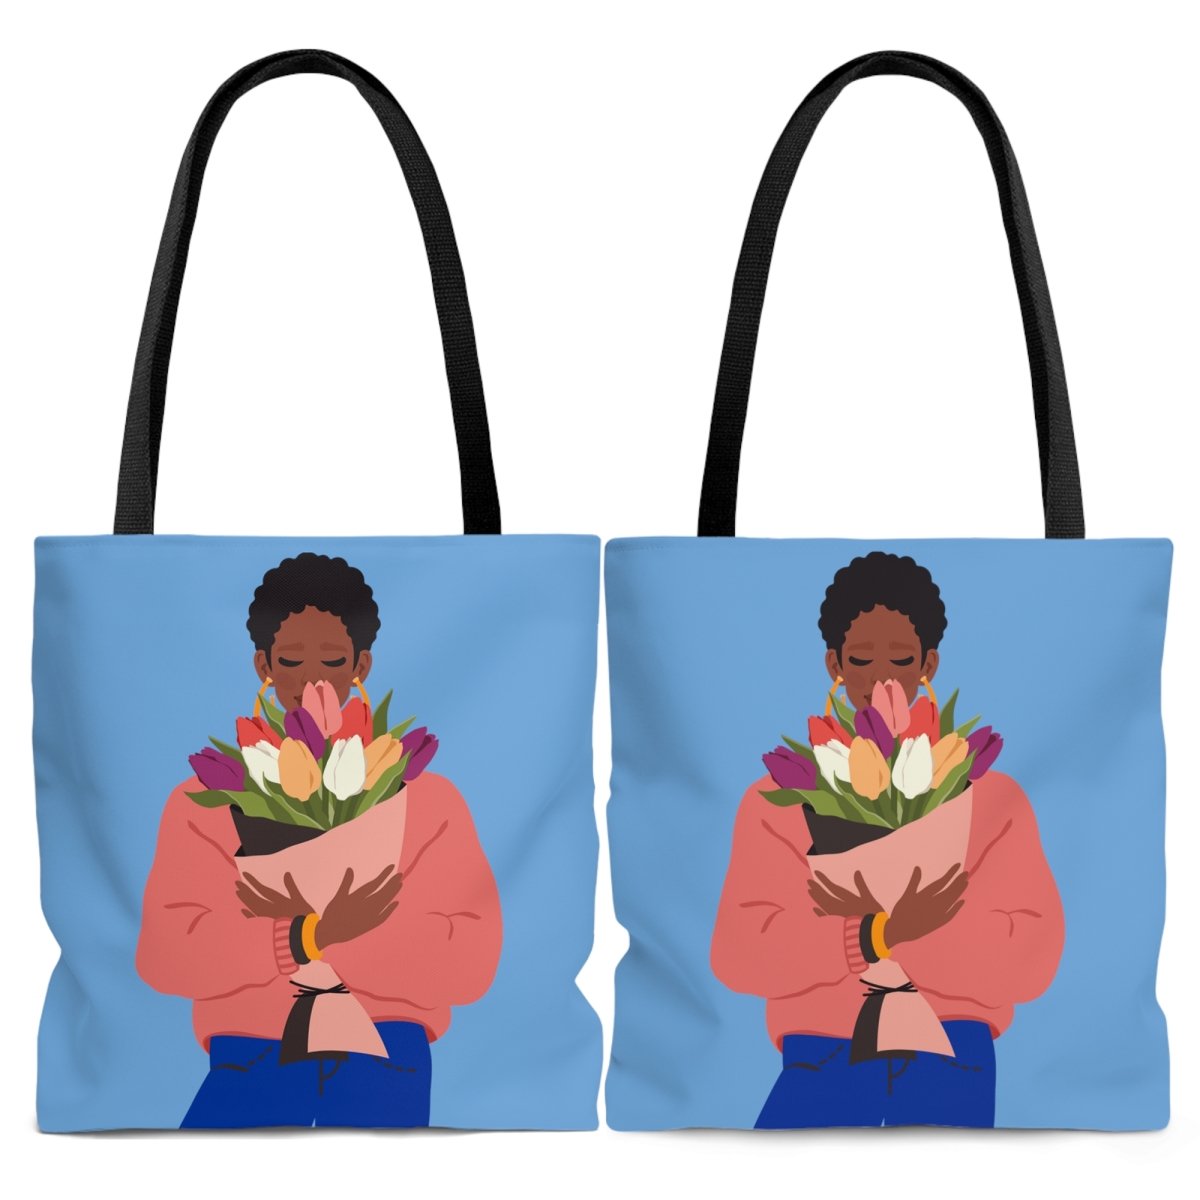 Afro Floral Tote Bag - The Trini Gee